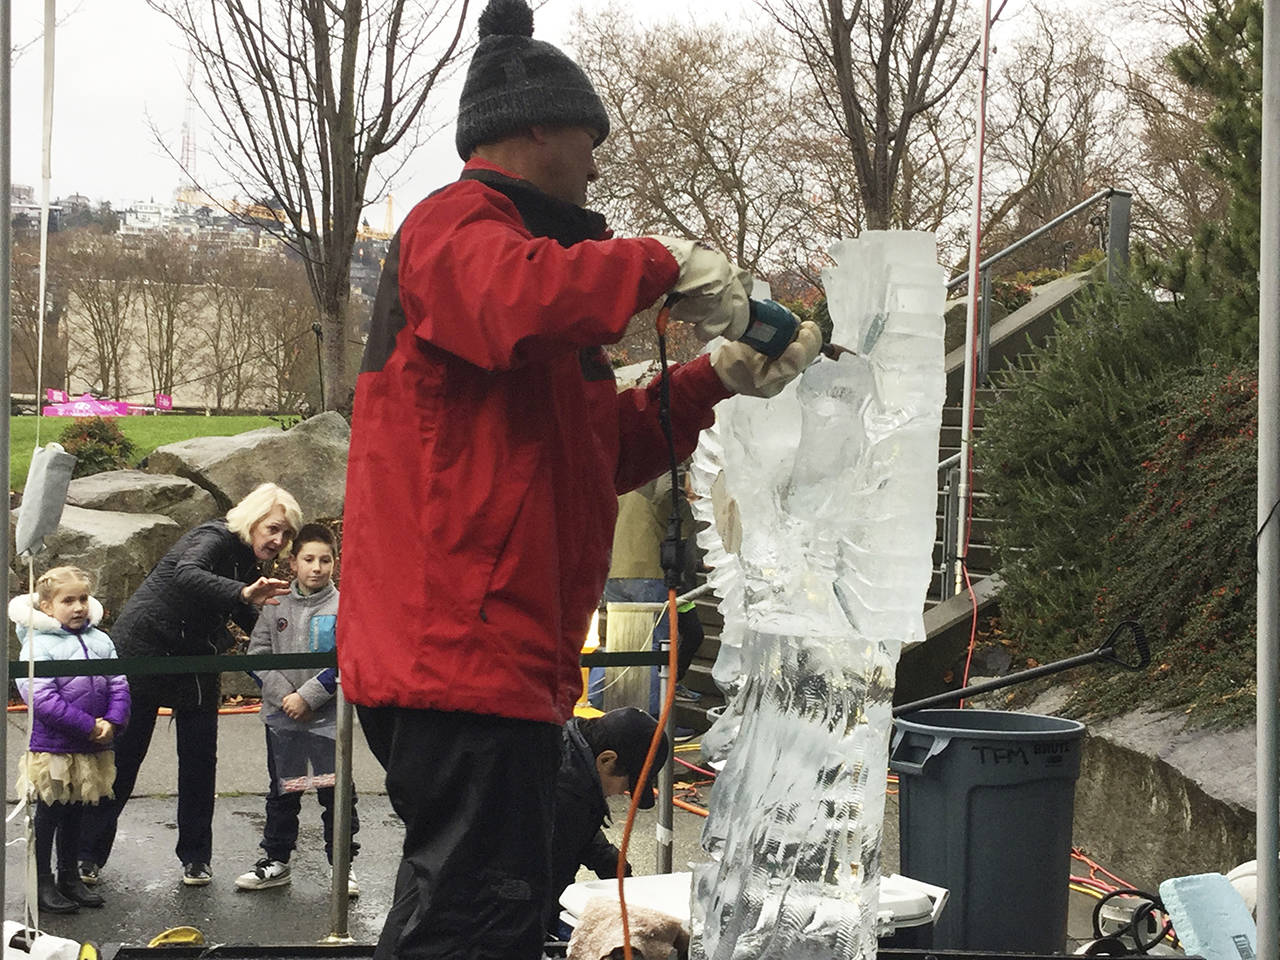 Kitburi uses a die grinder to smoothen the wings on an ice angel carving.